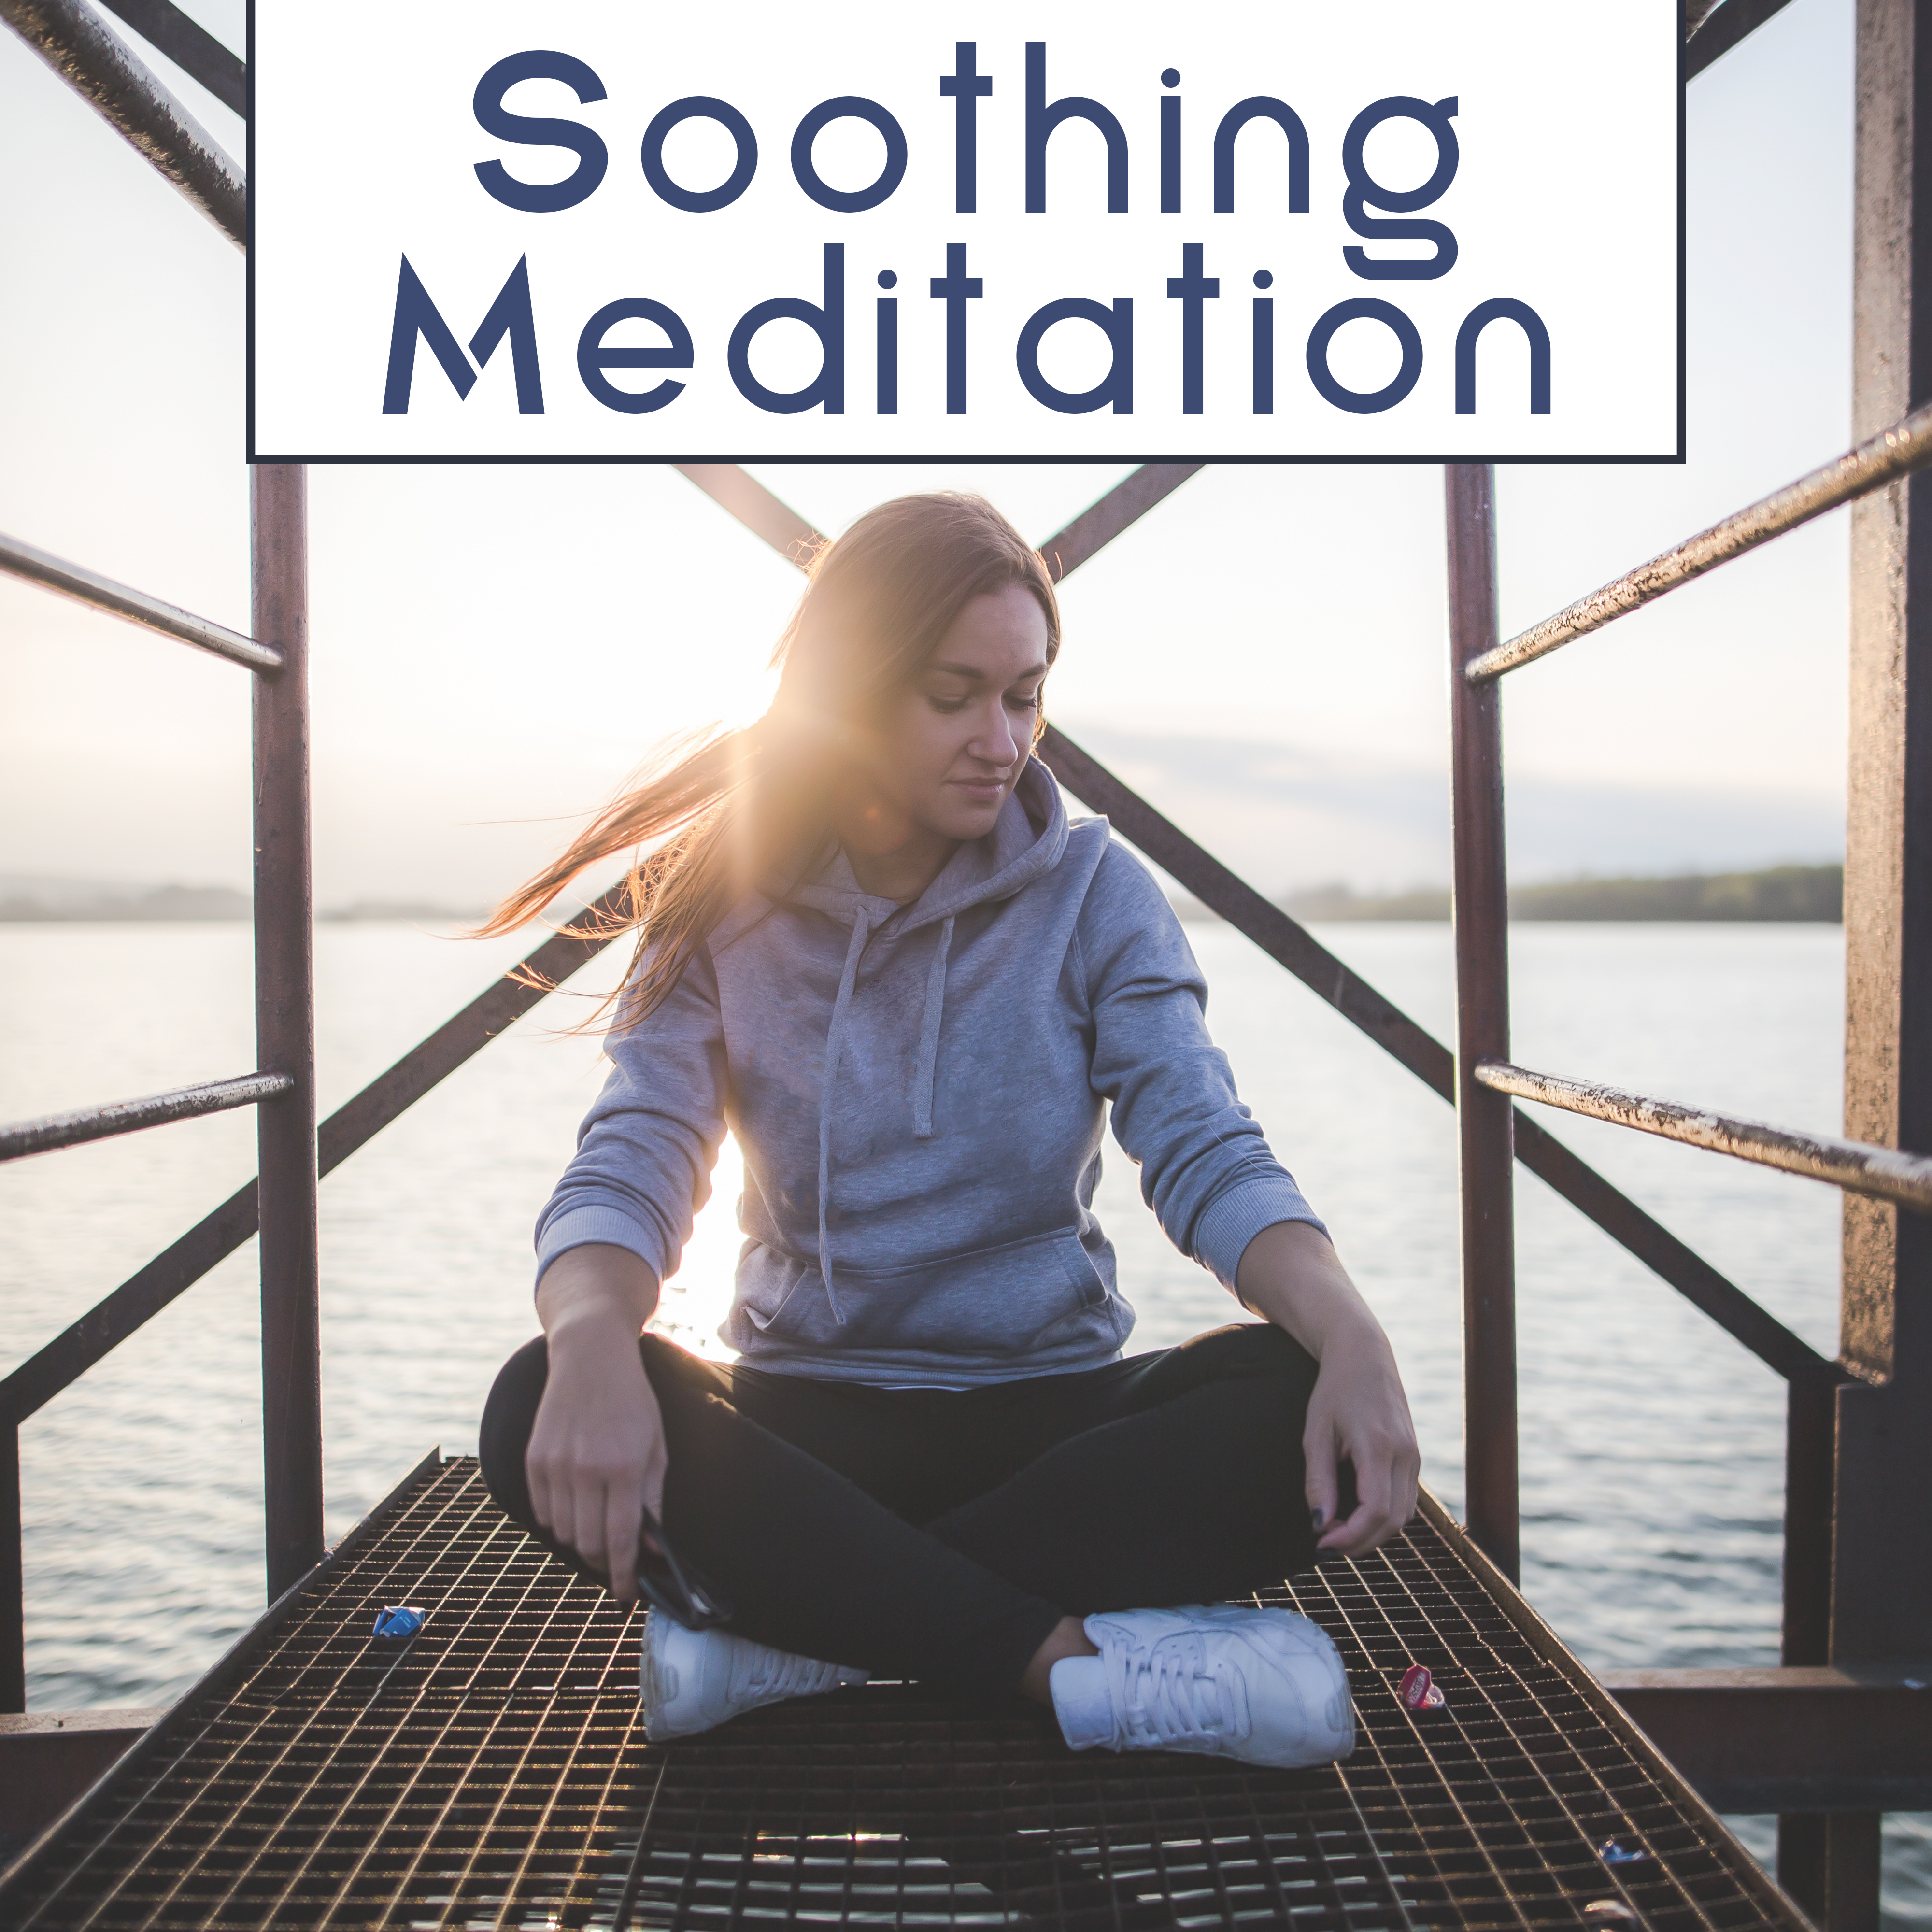 Soothing Meditation – Buddha Lounge, Inner Relaxation, Peaceful Waves, Stress Relief, New Age Meditation Sounds